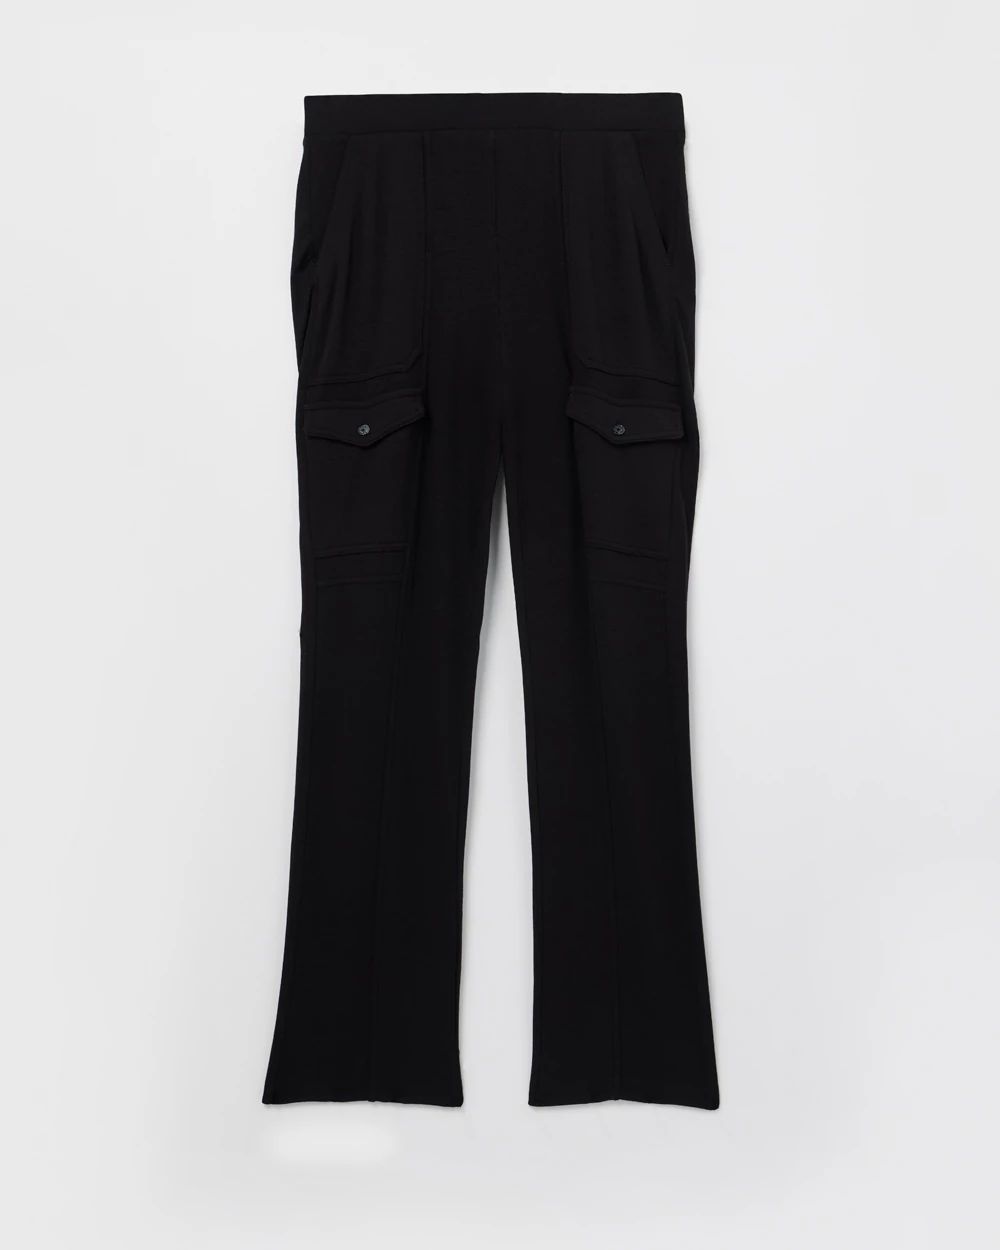 The Passporter   Utility Straight Leg Pants click to view larger image.